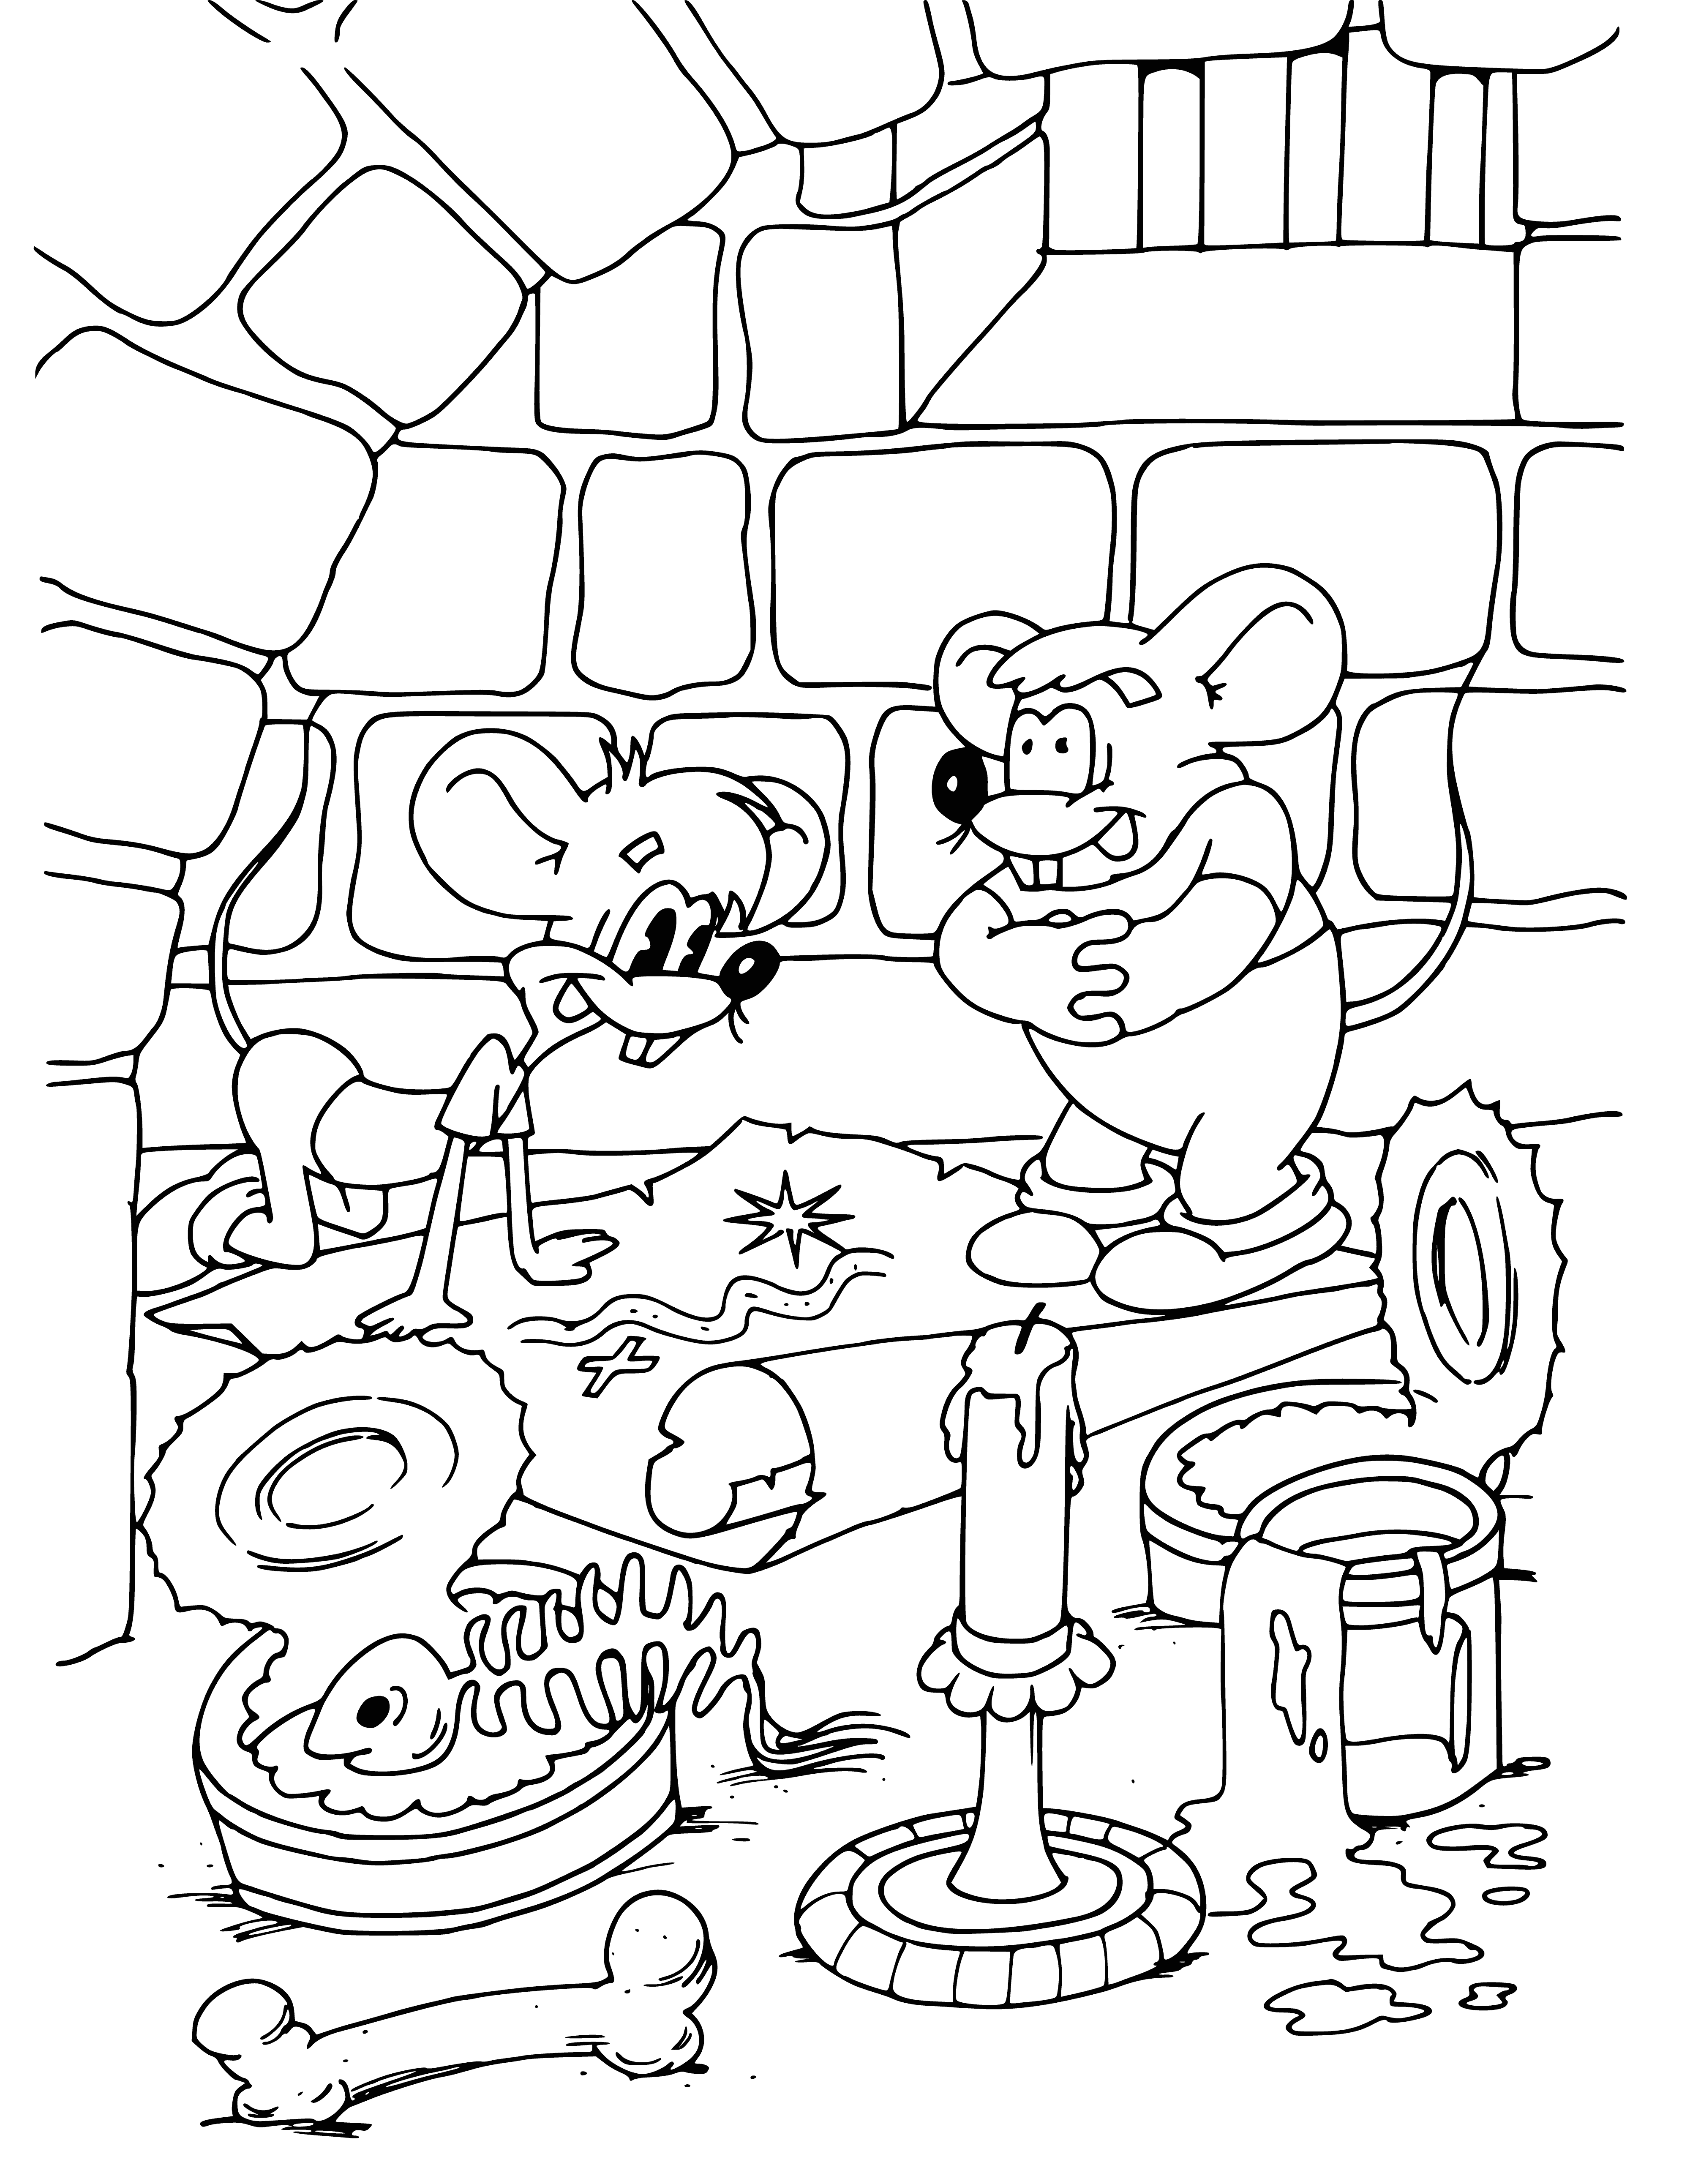 coloring page: Leopold follows a treasure map to find a key for a treasure chest.